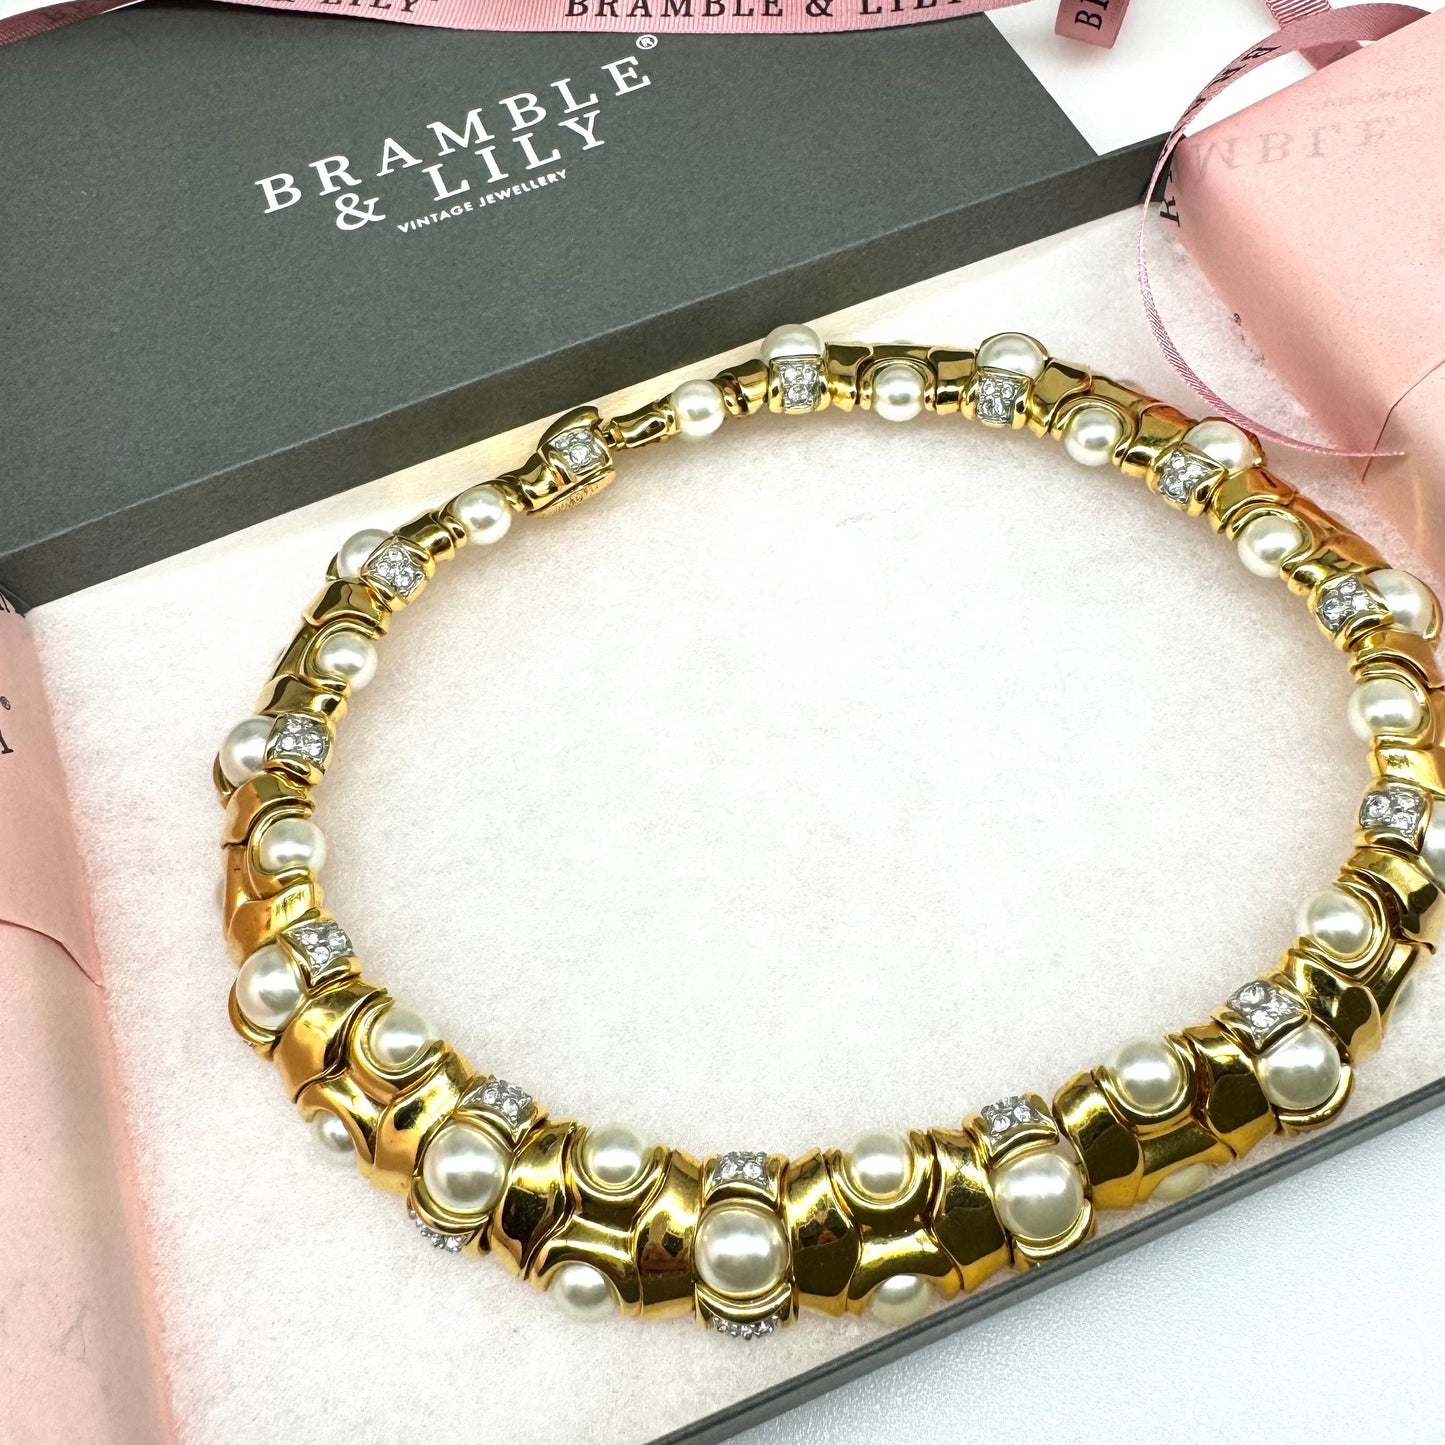 Faux Pearl and Swarovski Crystal Gold Plated Choker